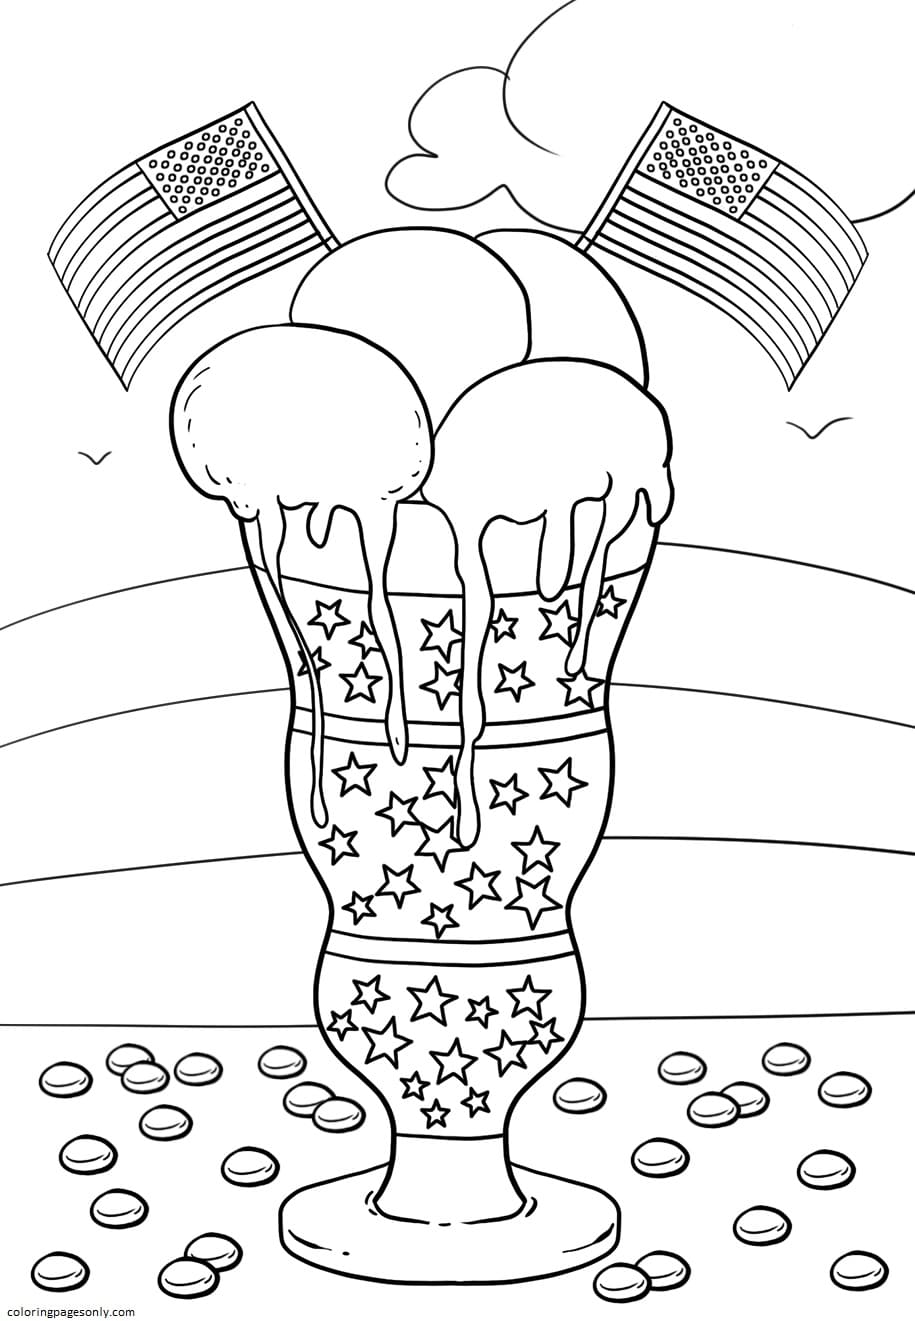 Th Of July Coloring Pages Coloring Pages To Print Th Of July Coloring Page Printable Free